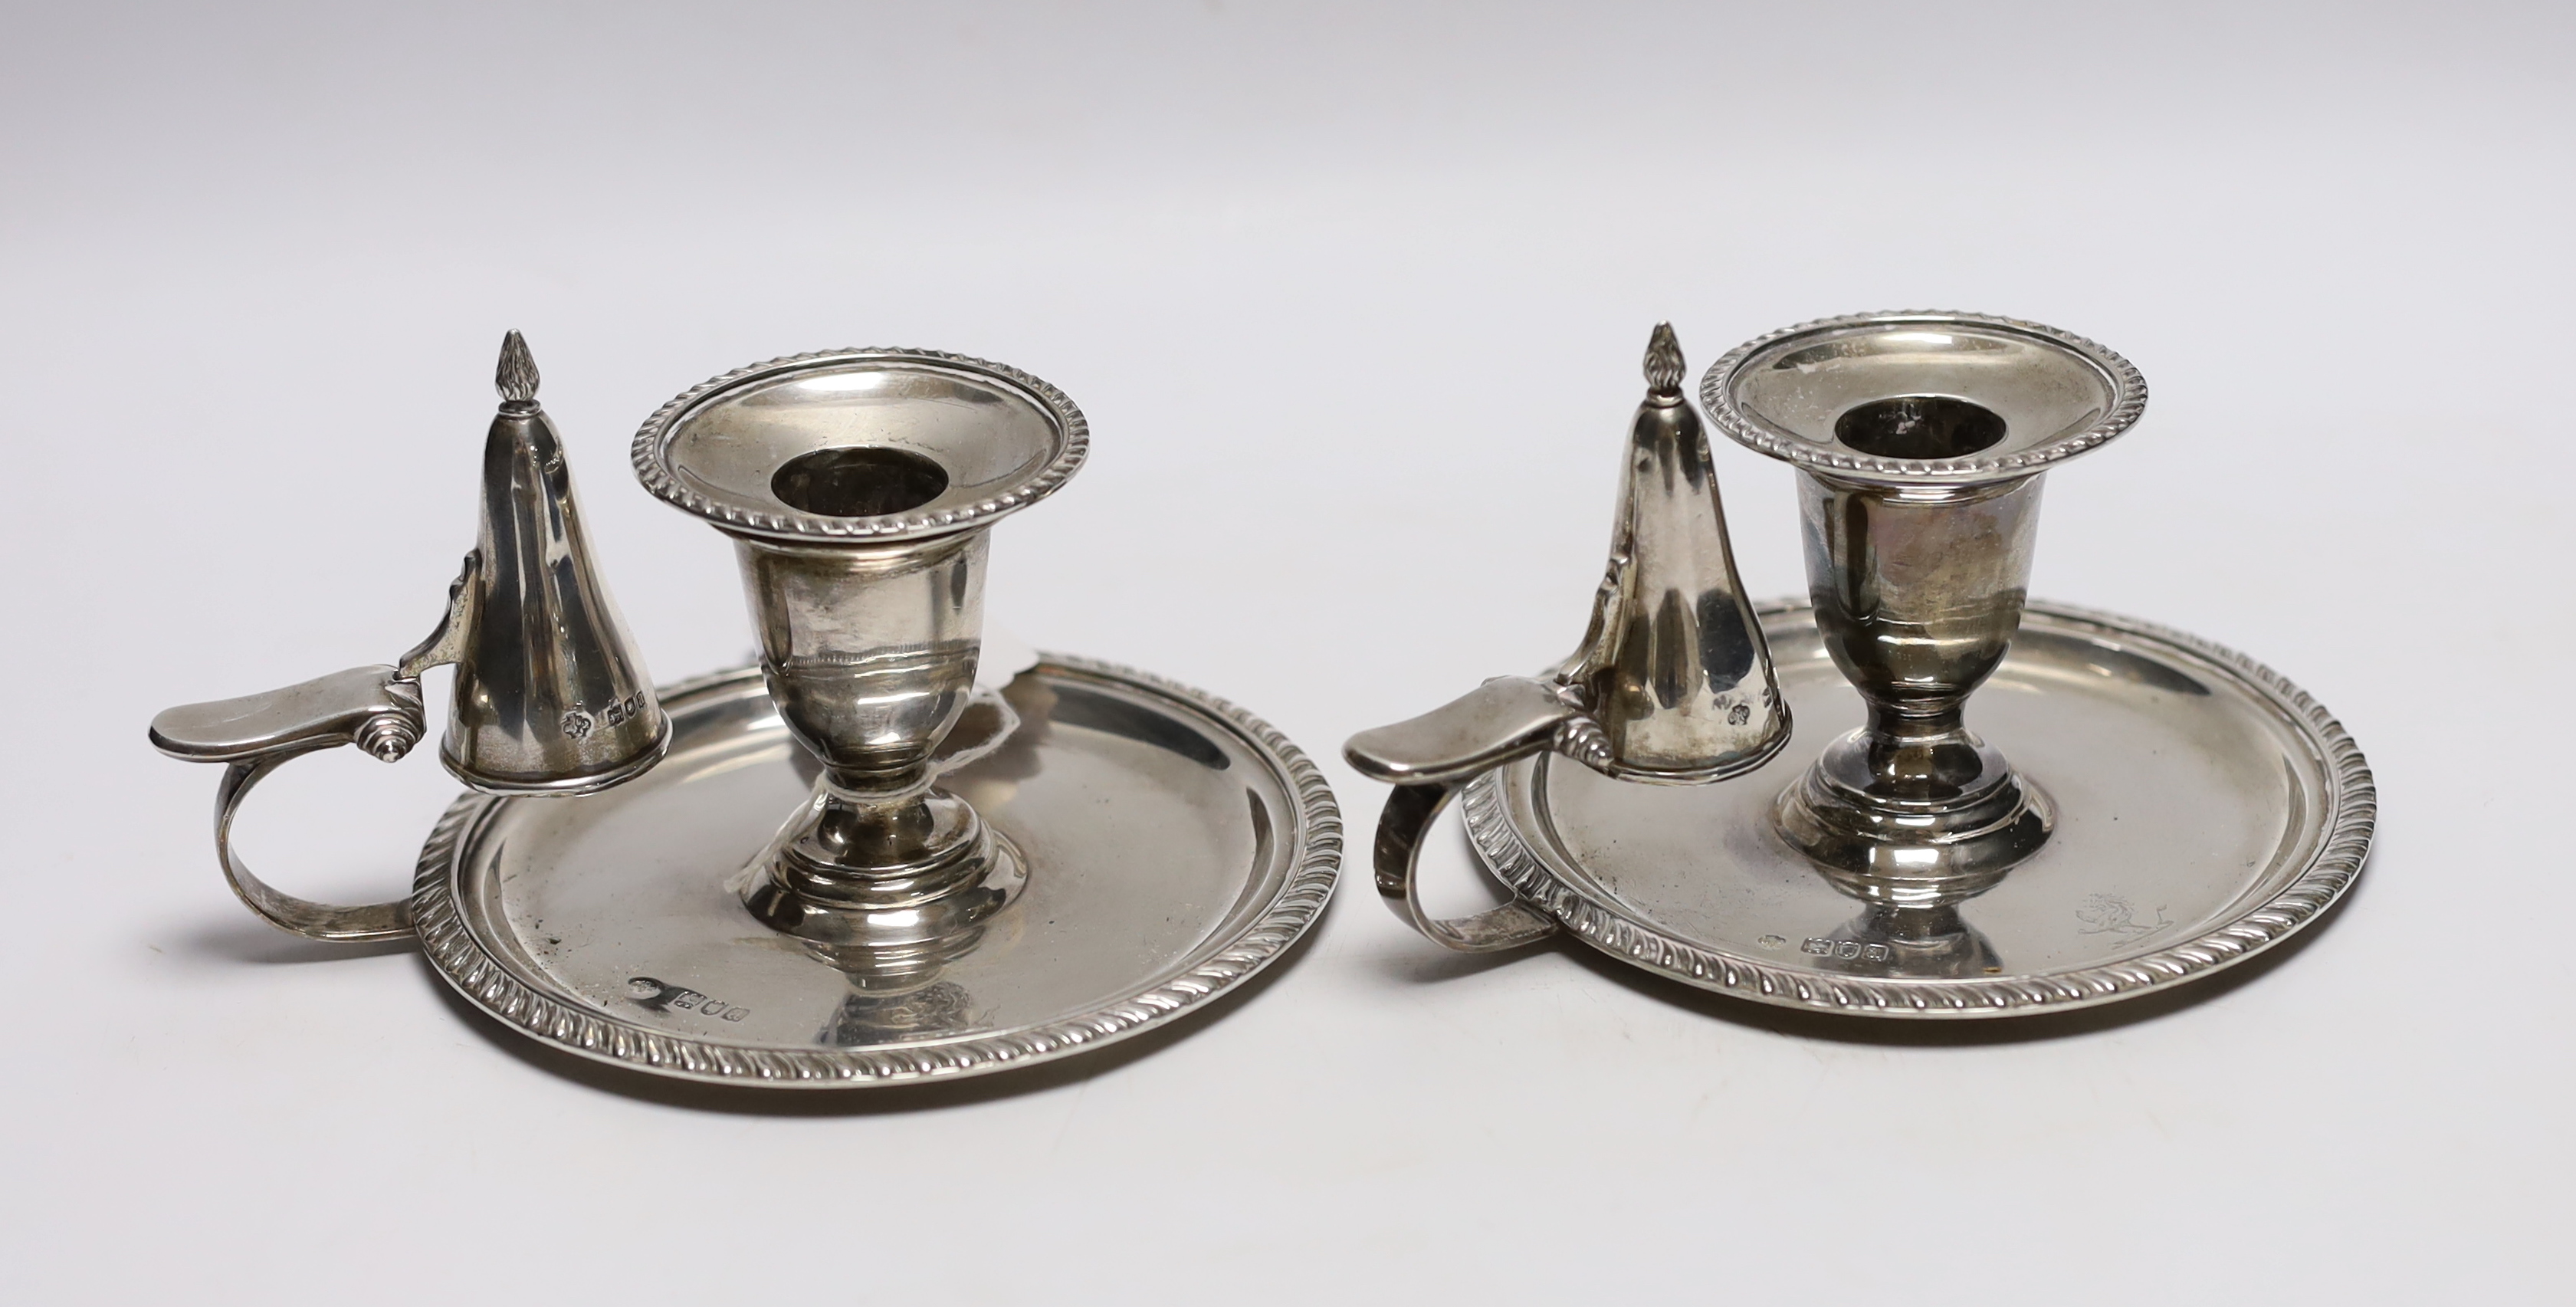 A pair of late Victorian silver chambersticks, with gadrooned borders and matching extinguishers, William Hutton & Sons, London, 1896, base diameter 13.2cm, 18.3oz.